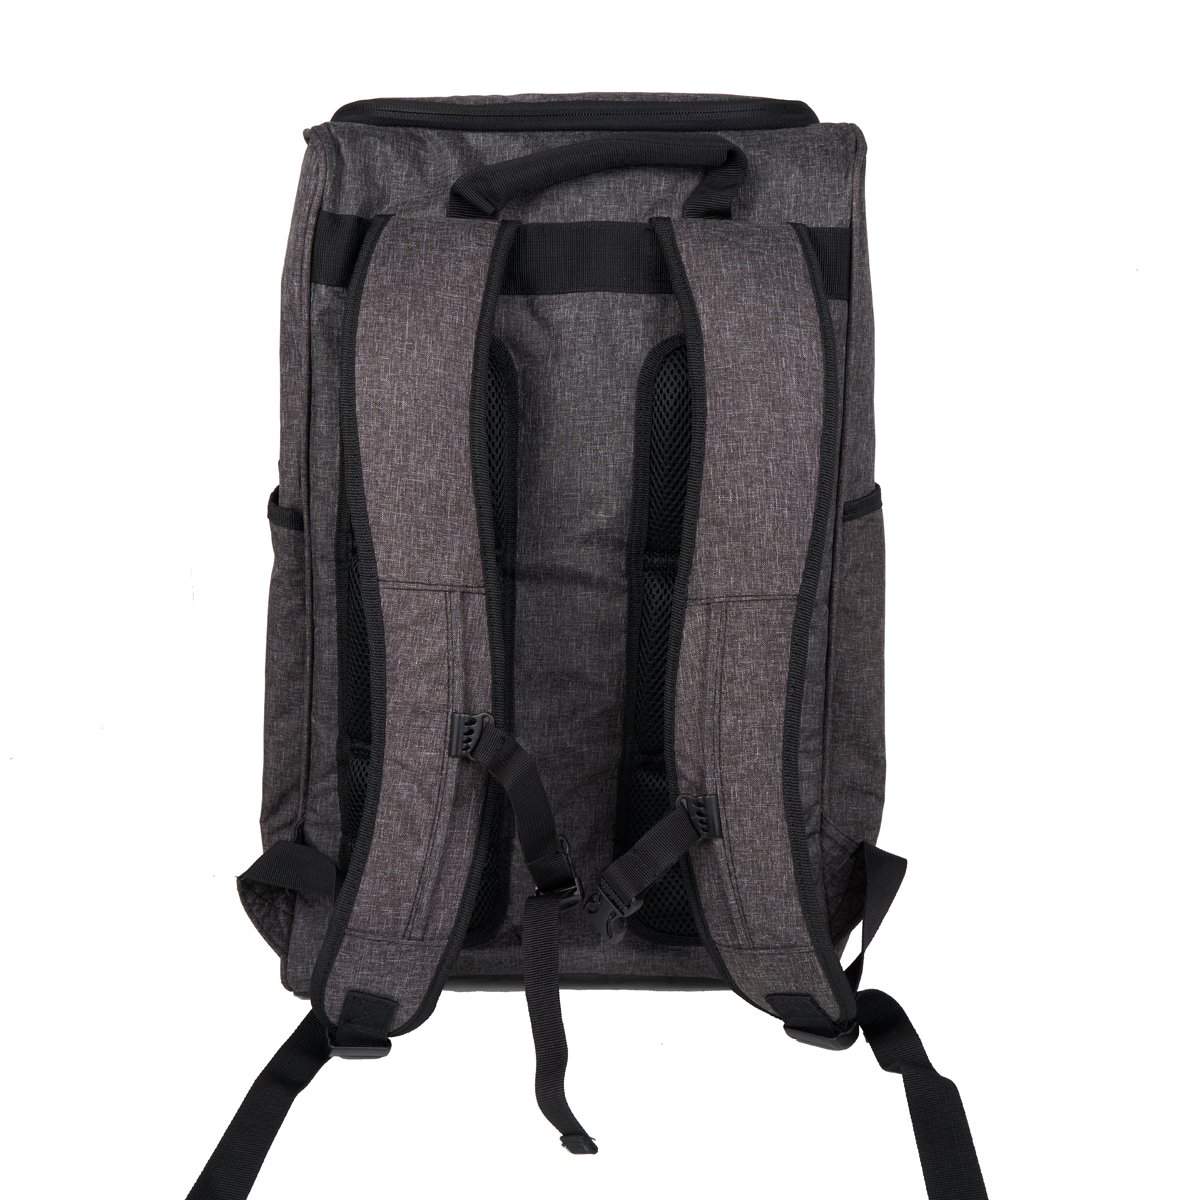 Rollerblade Urban Commuter Backpack Anthracite